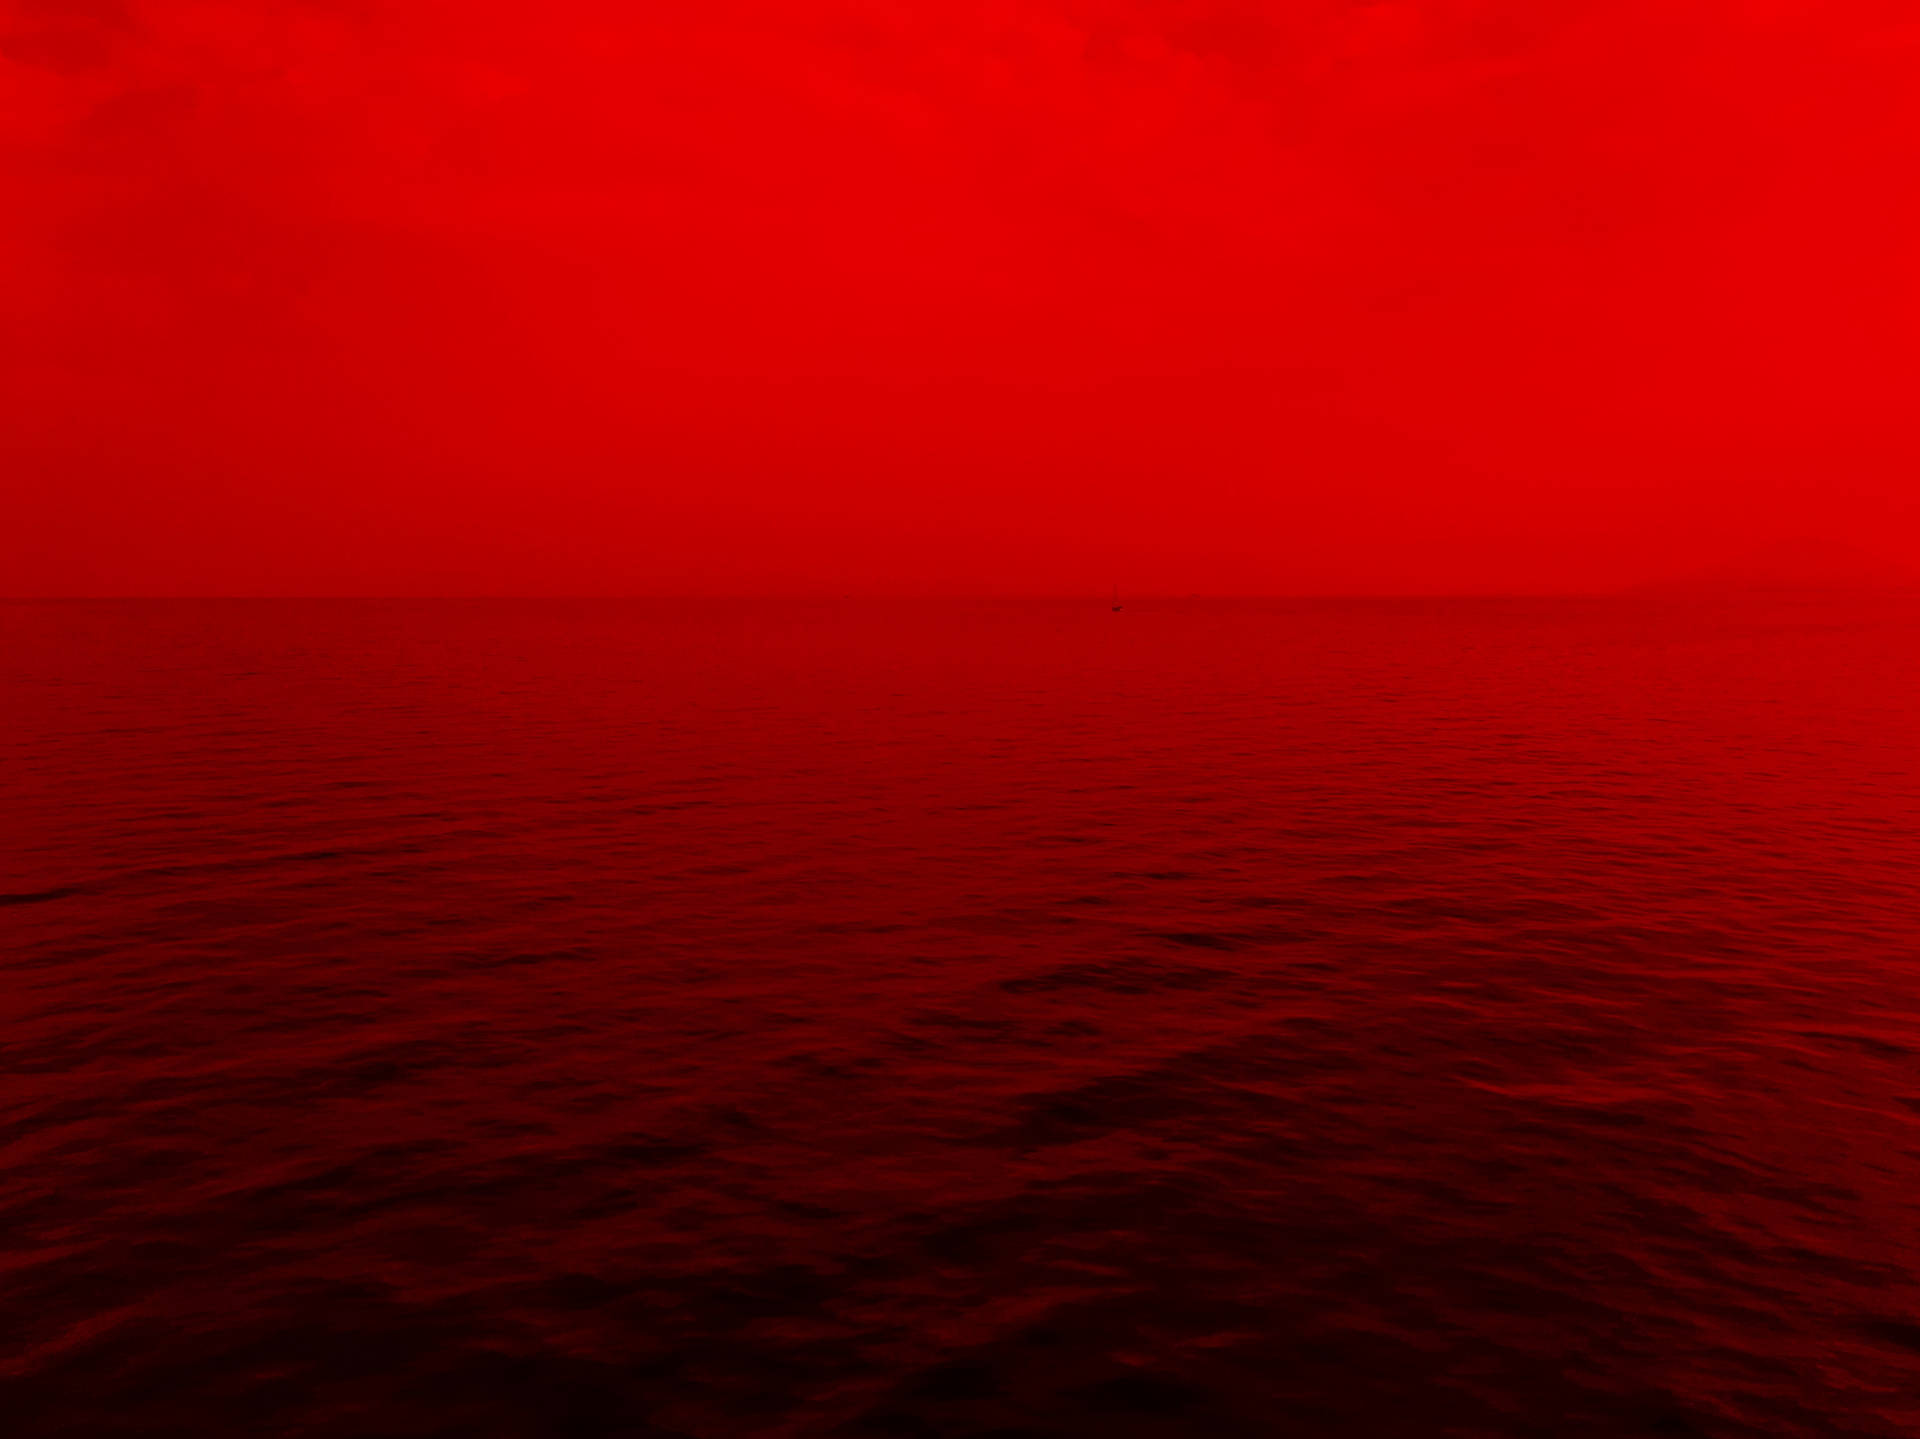 A Stunning View Of The Vibrant Red Sea Background